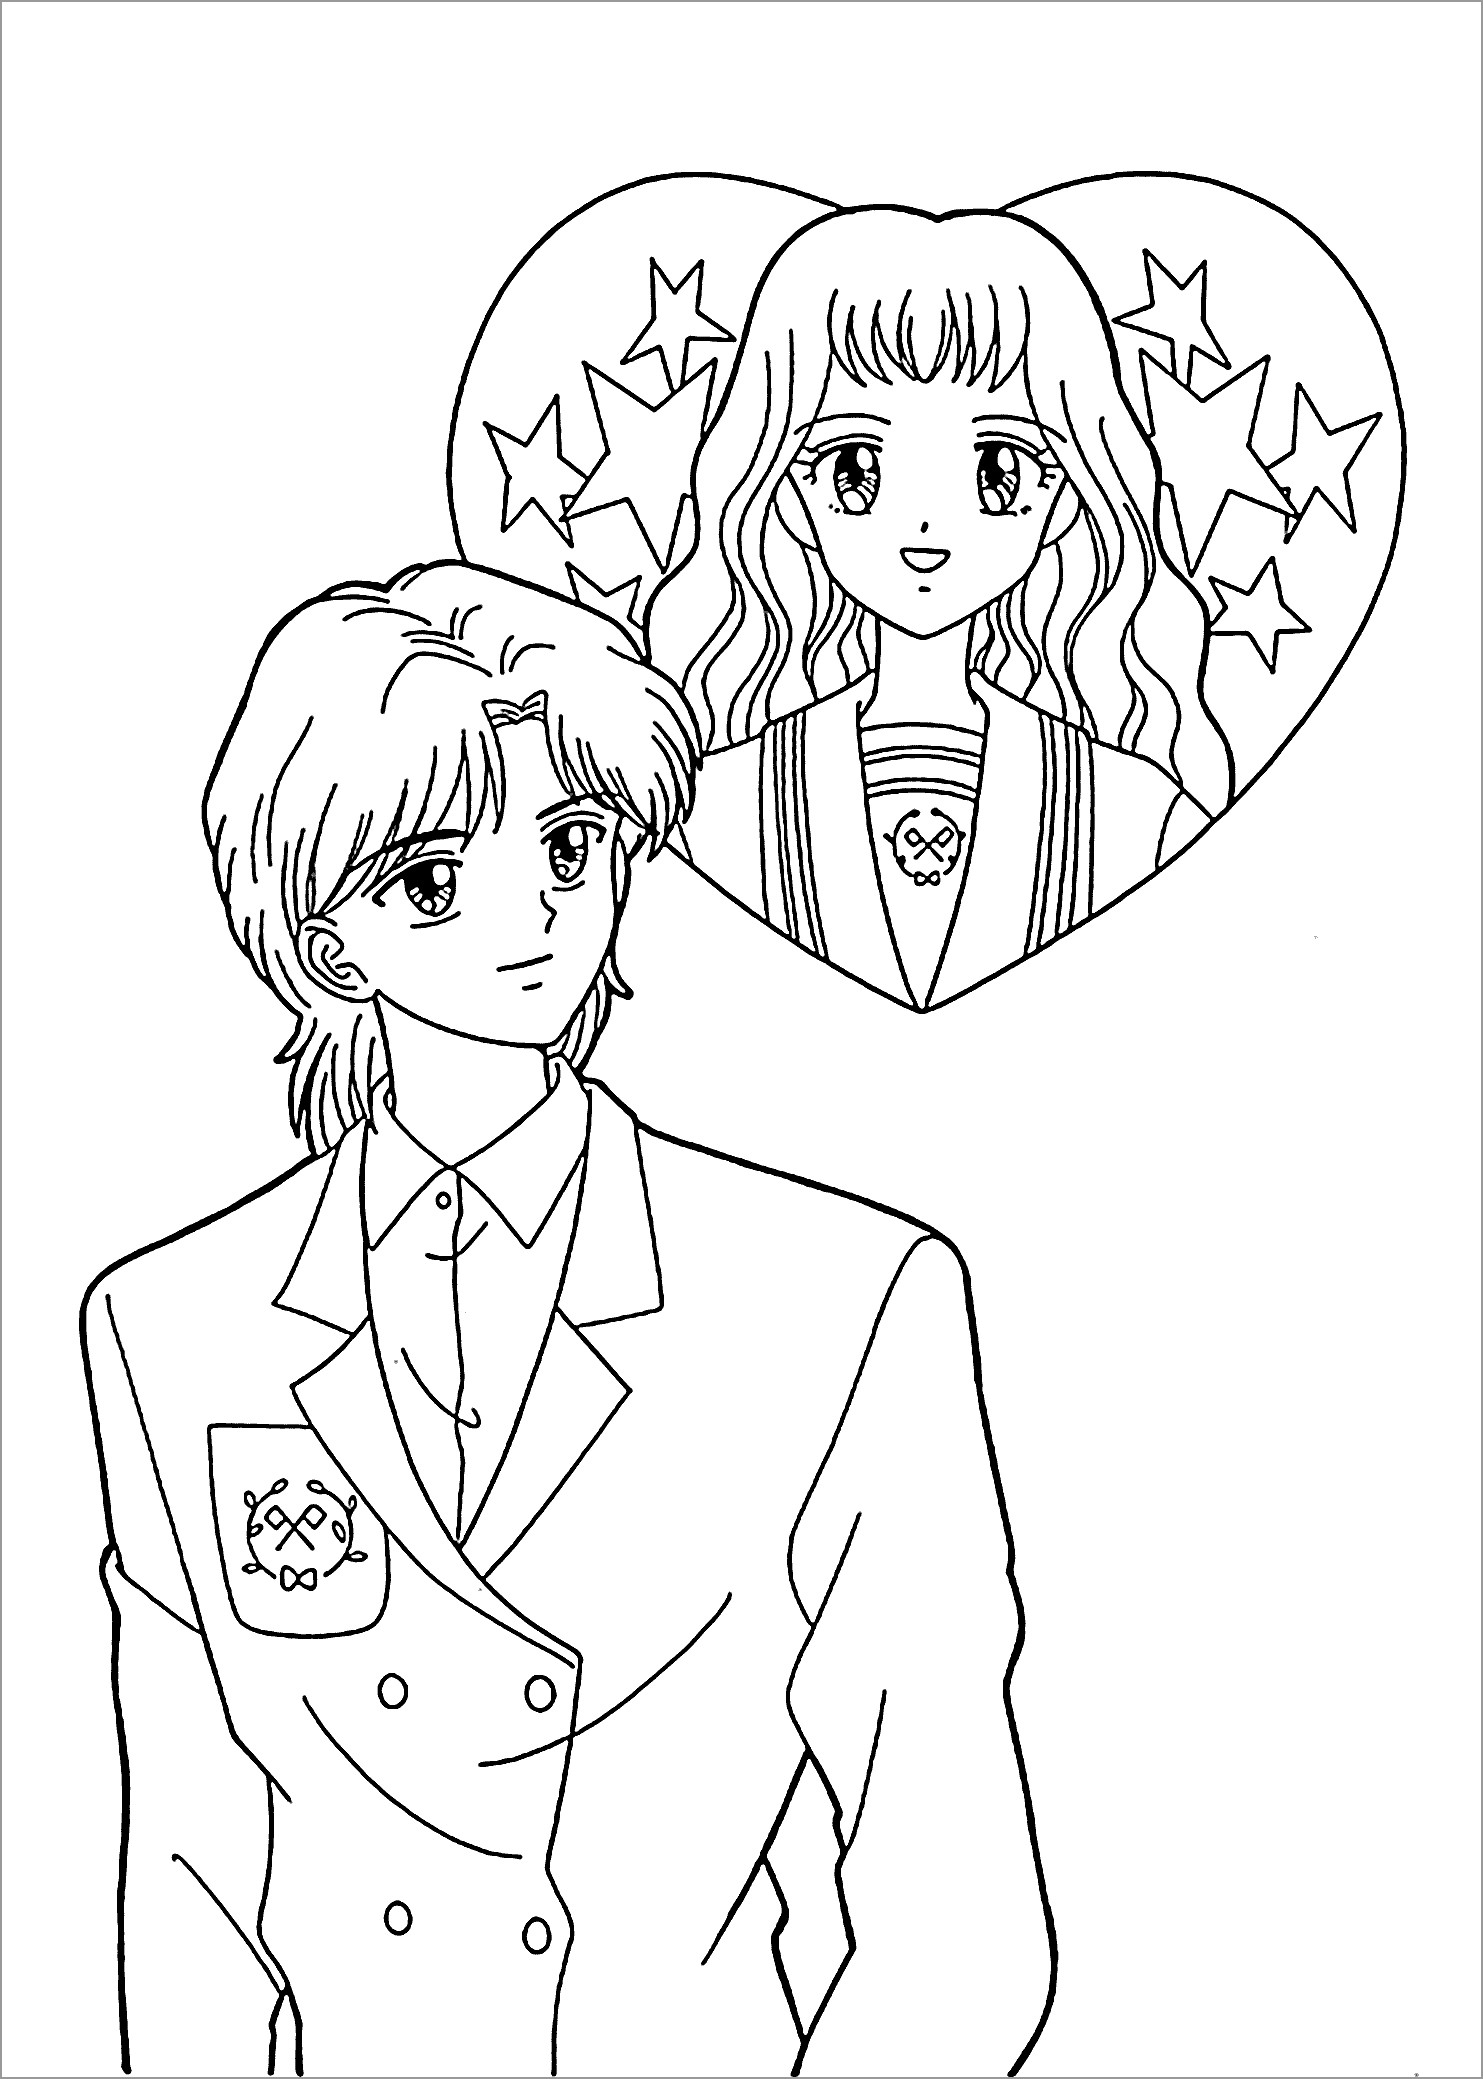 New Boy and Girl Love Coloring Page   ColoringBay